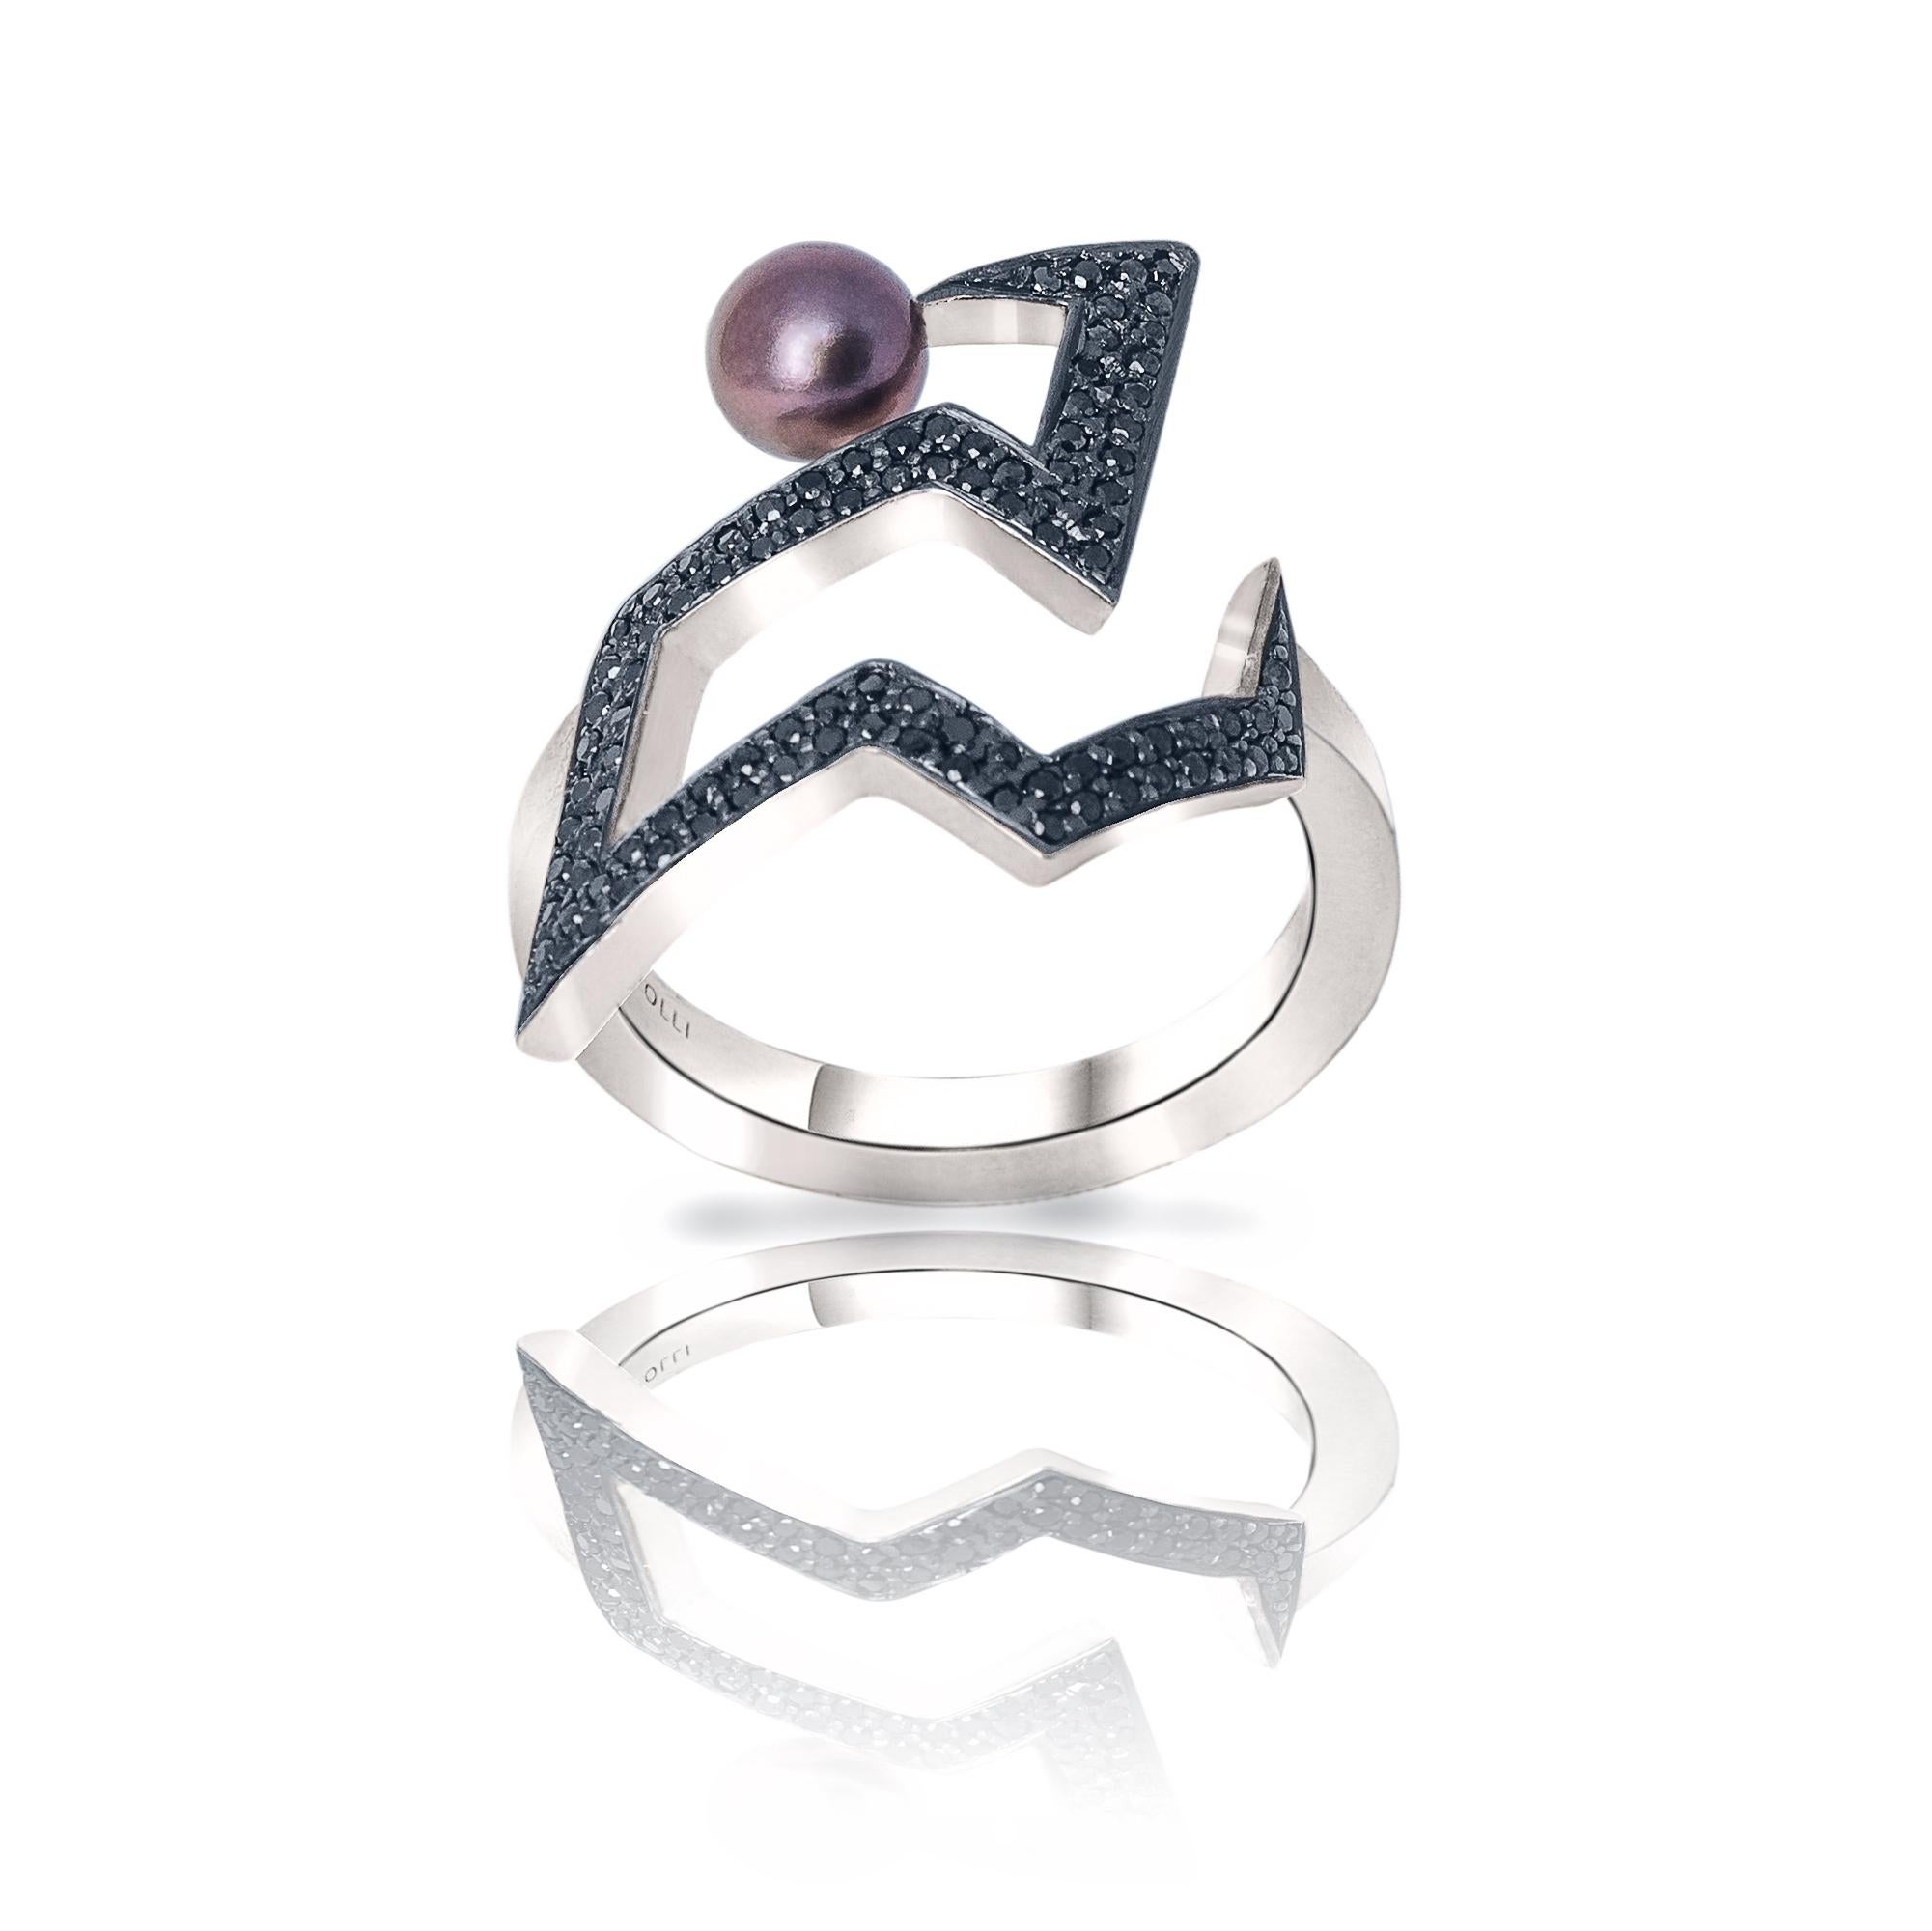 Ring in polished sterling silver, set with black diamonds and peacock pearl
Size UK M 1/2 - US 6 1/2 in stock, more sizes available upon request, made to order pieces aren't returnable
Elegant and modern design inspired by the '60s space age